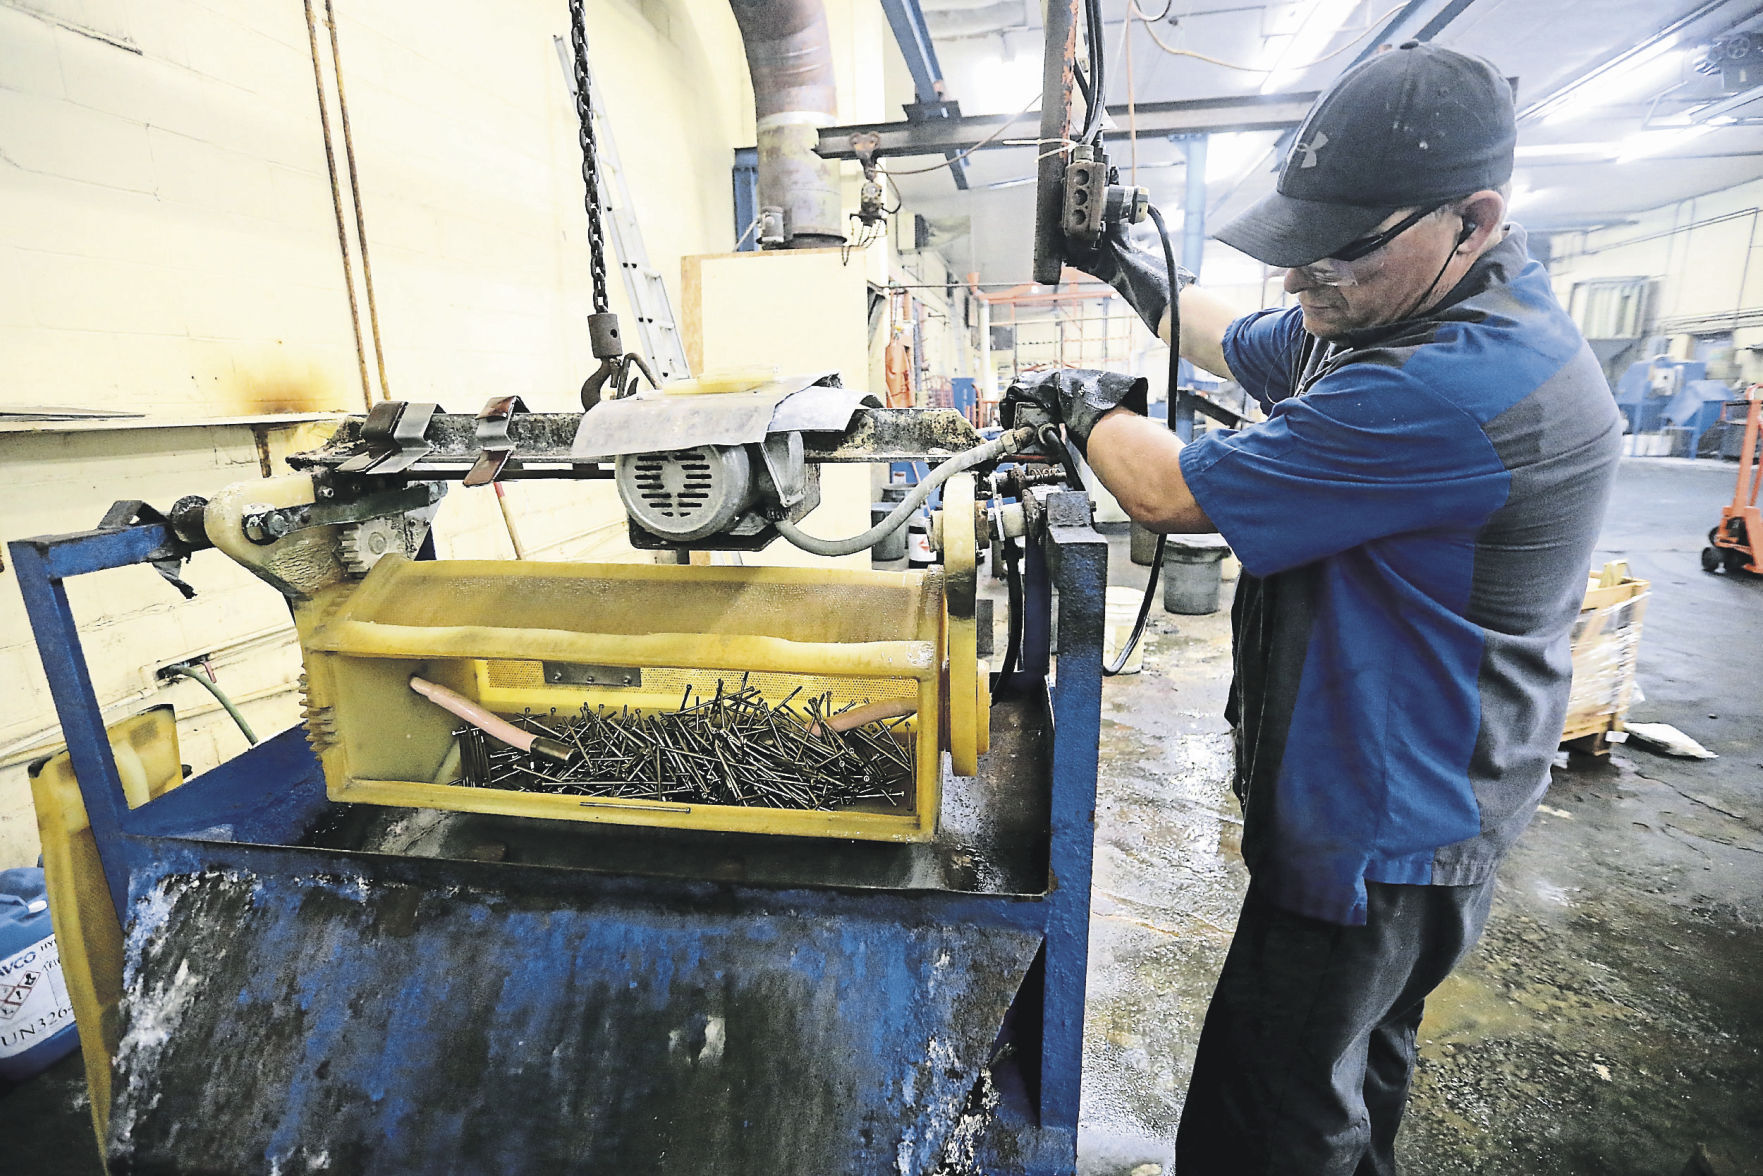 Troy Mulholland removes items from a barrel at Key City Plating in Dubuque. PHOTO CREDIT: JESSICA REILLY